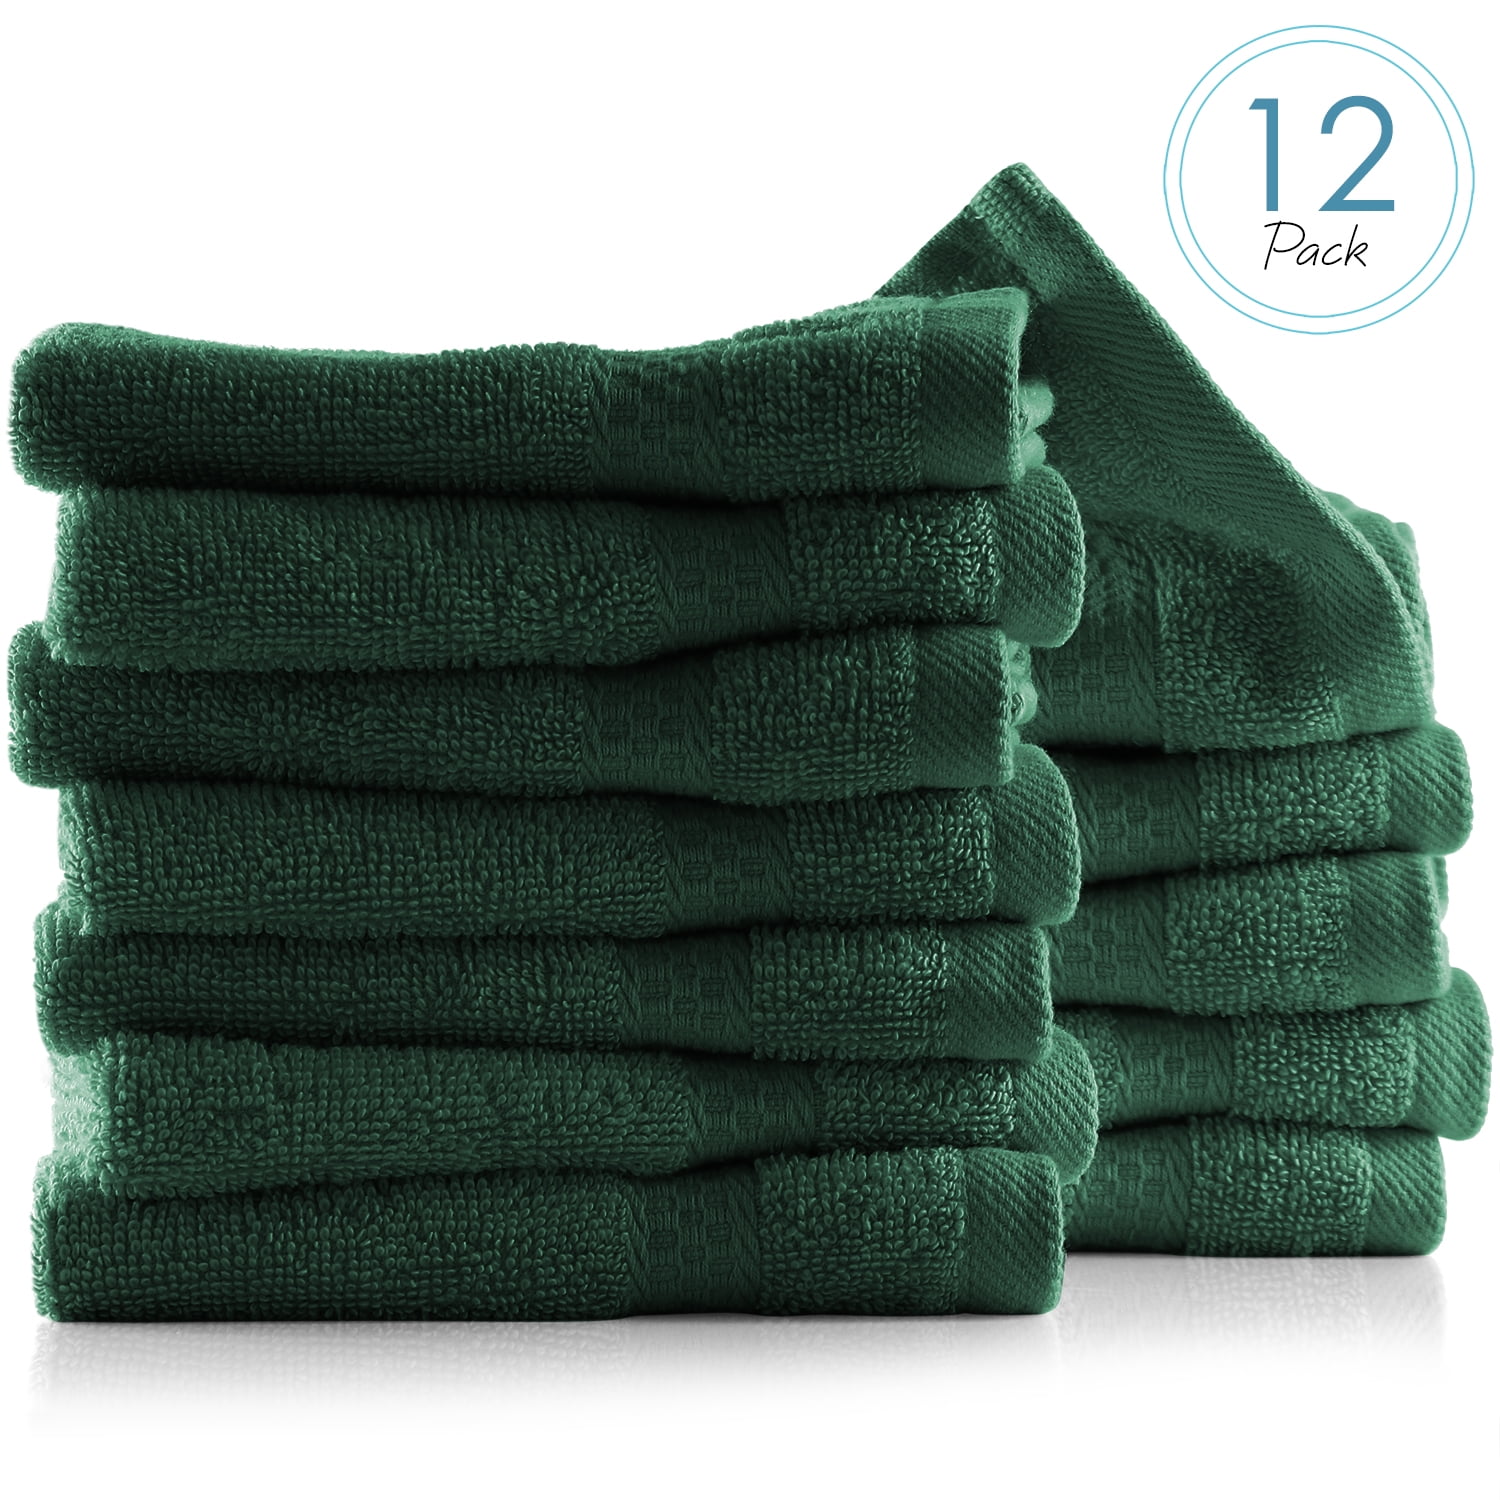 12 Pack washcloth Towel Set 100% Cotton Soft Luxury Wash Cloths for Face & Body